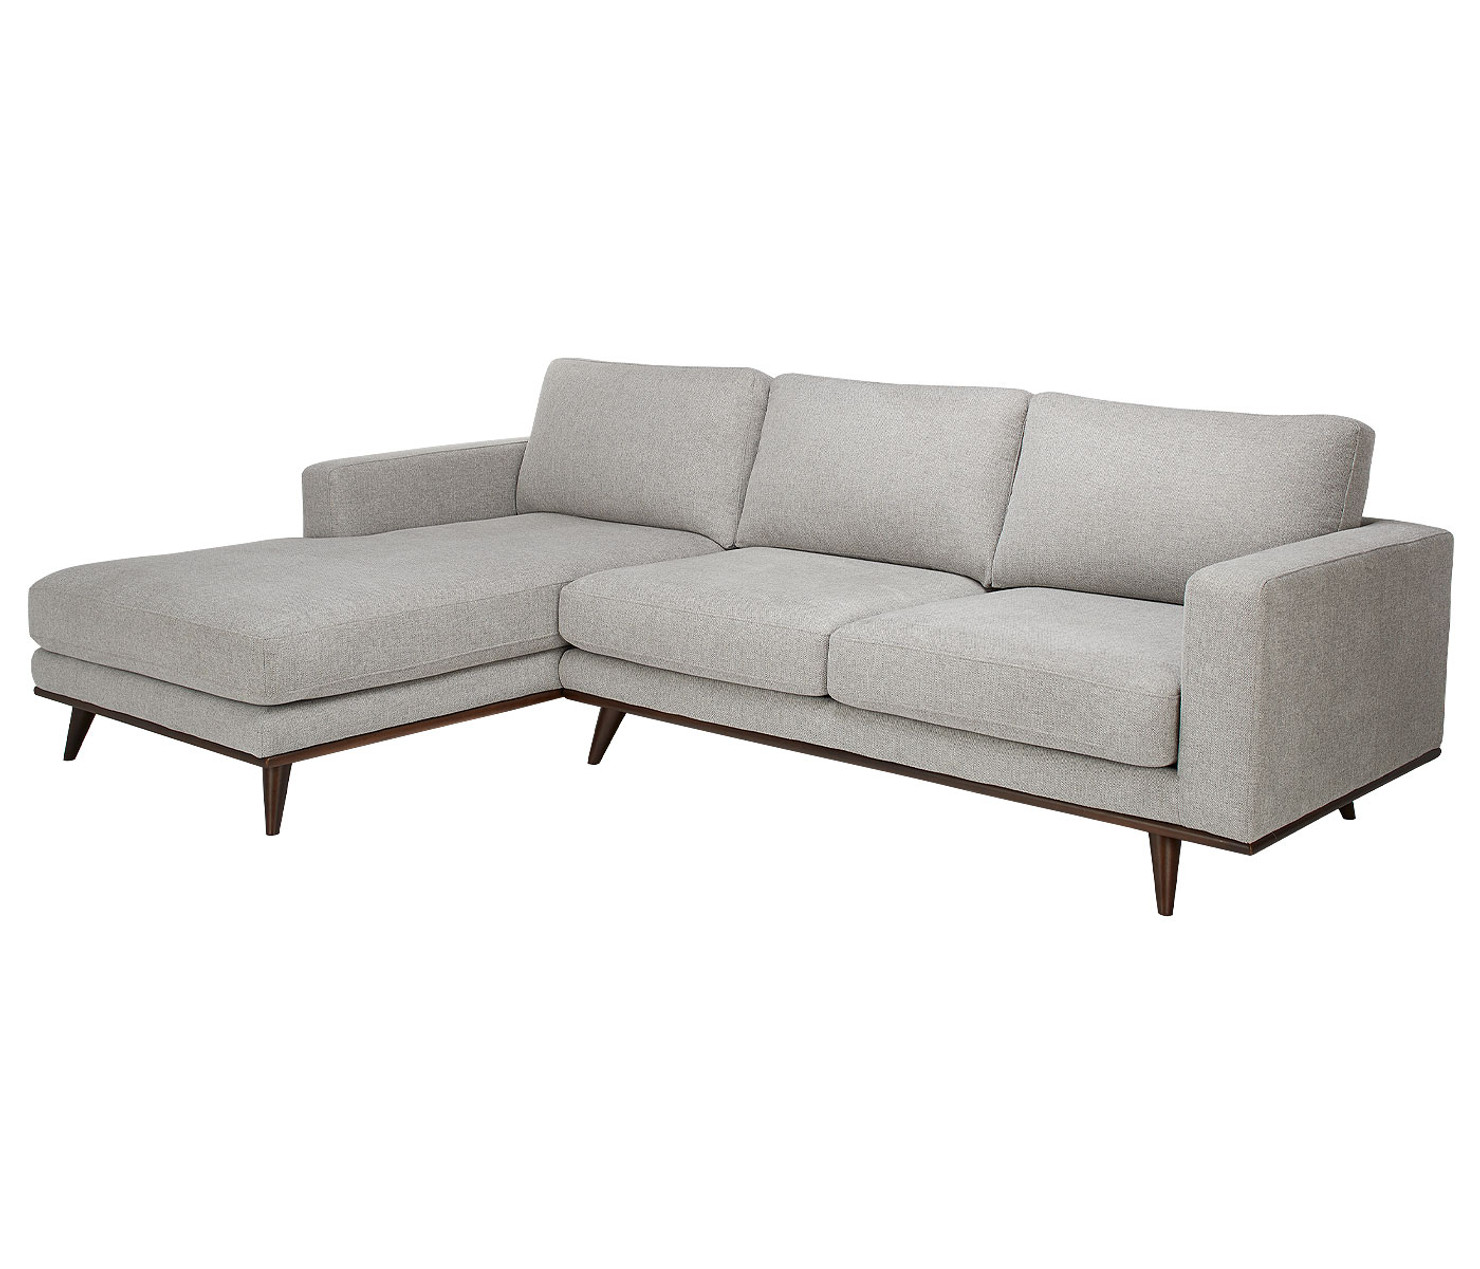 Phinney Fabric Sectional-Fawn - Kasala